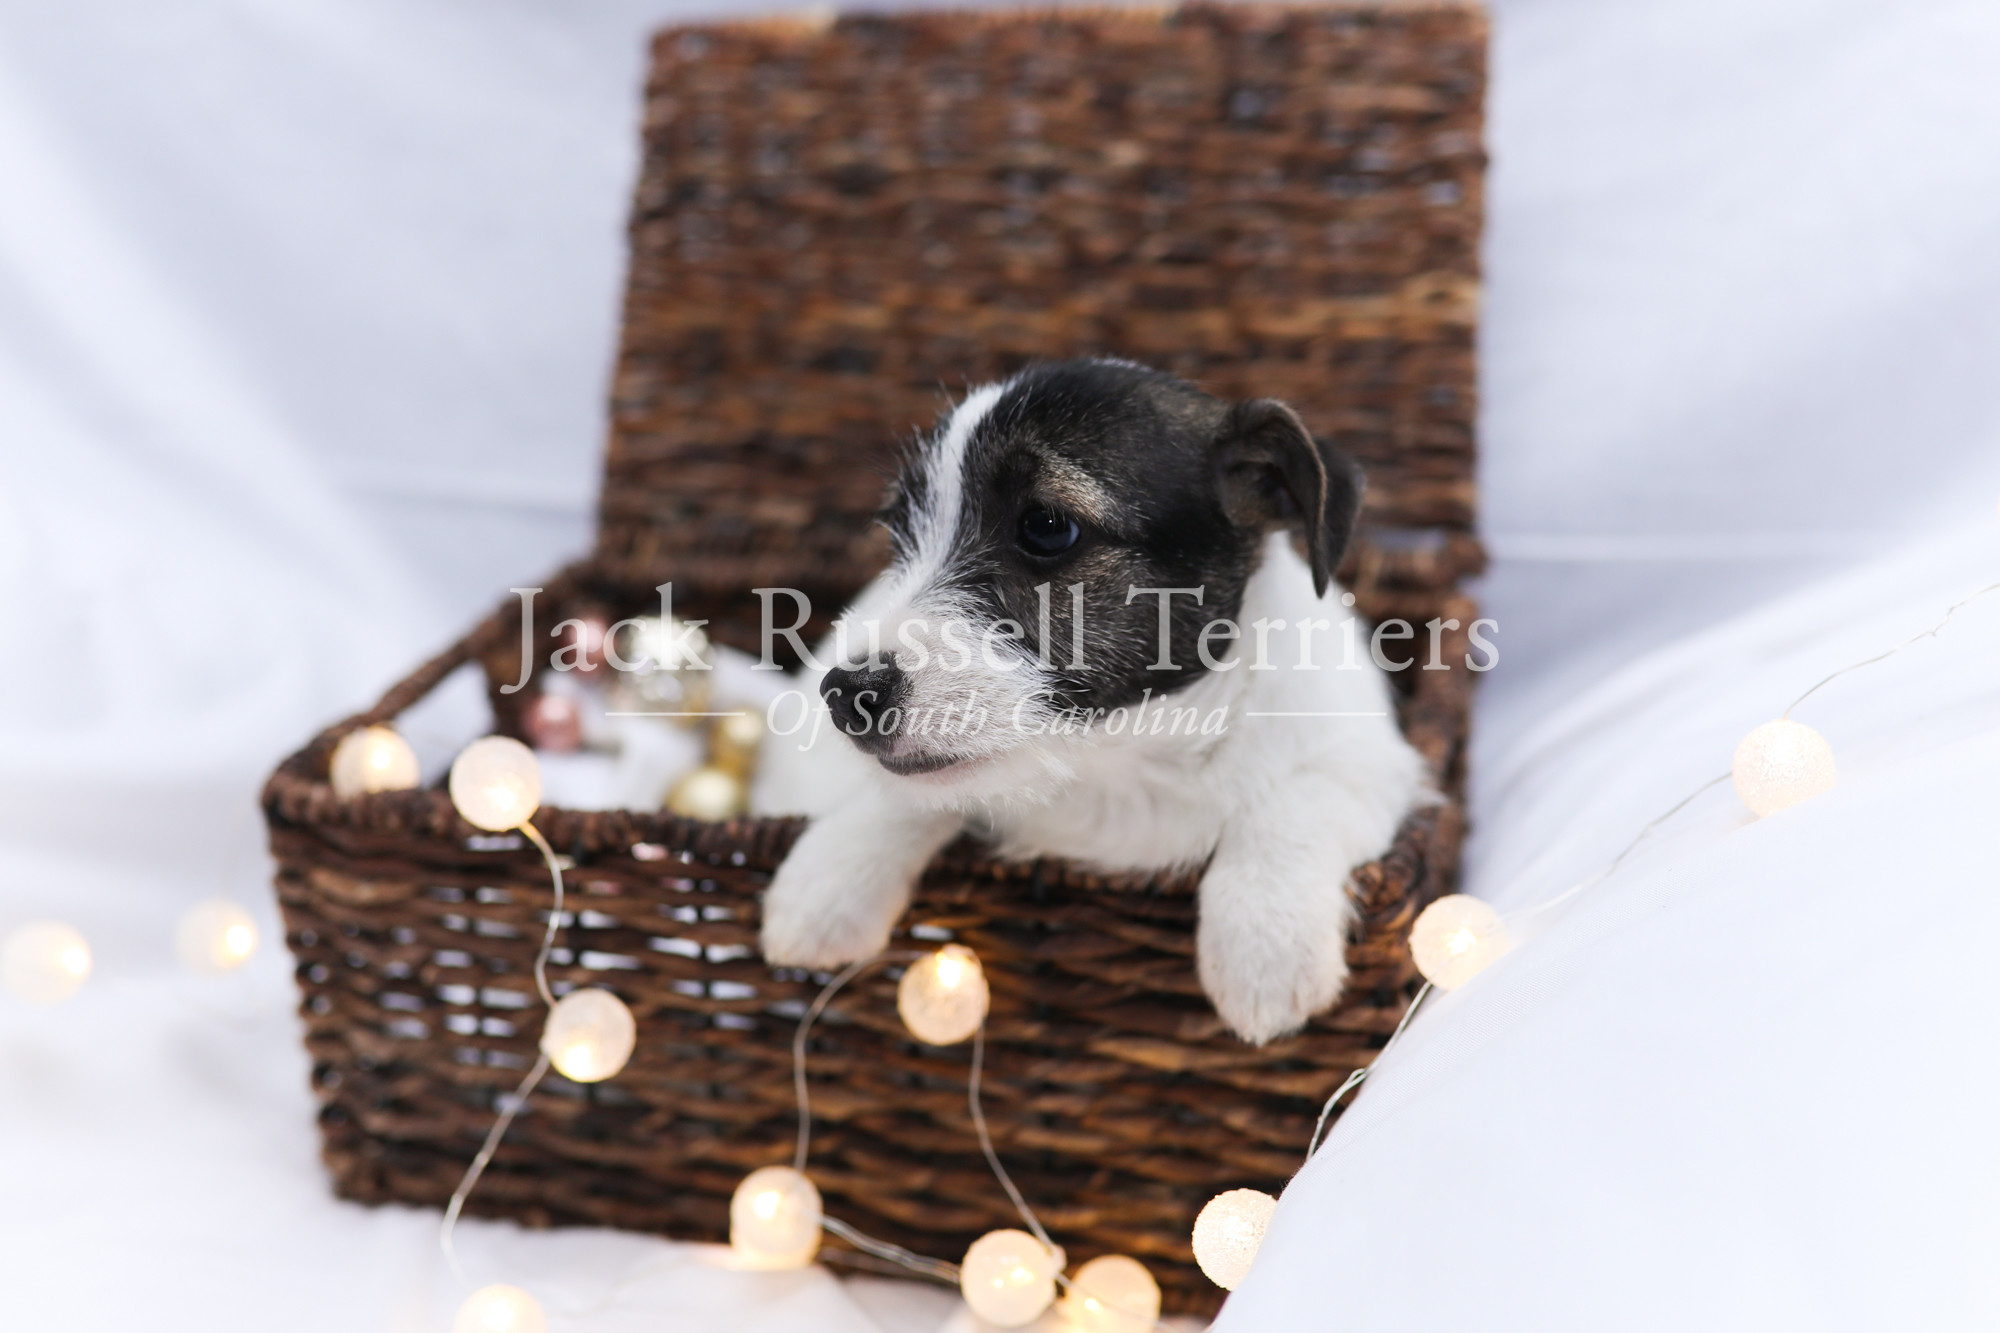 Meet Bailey the tricolor, rough coat Jack Russell Terrier